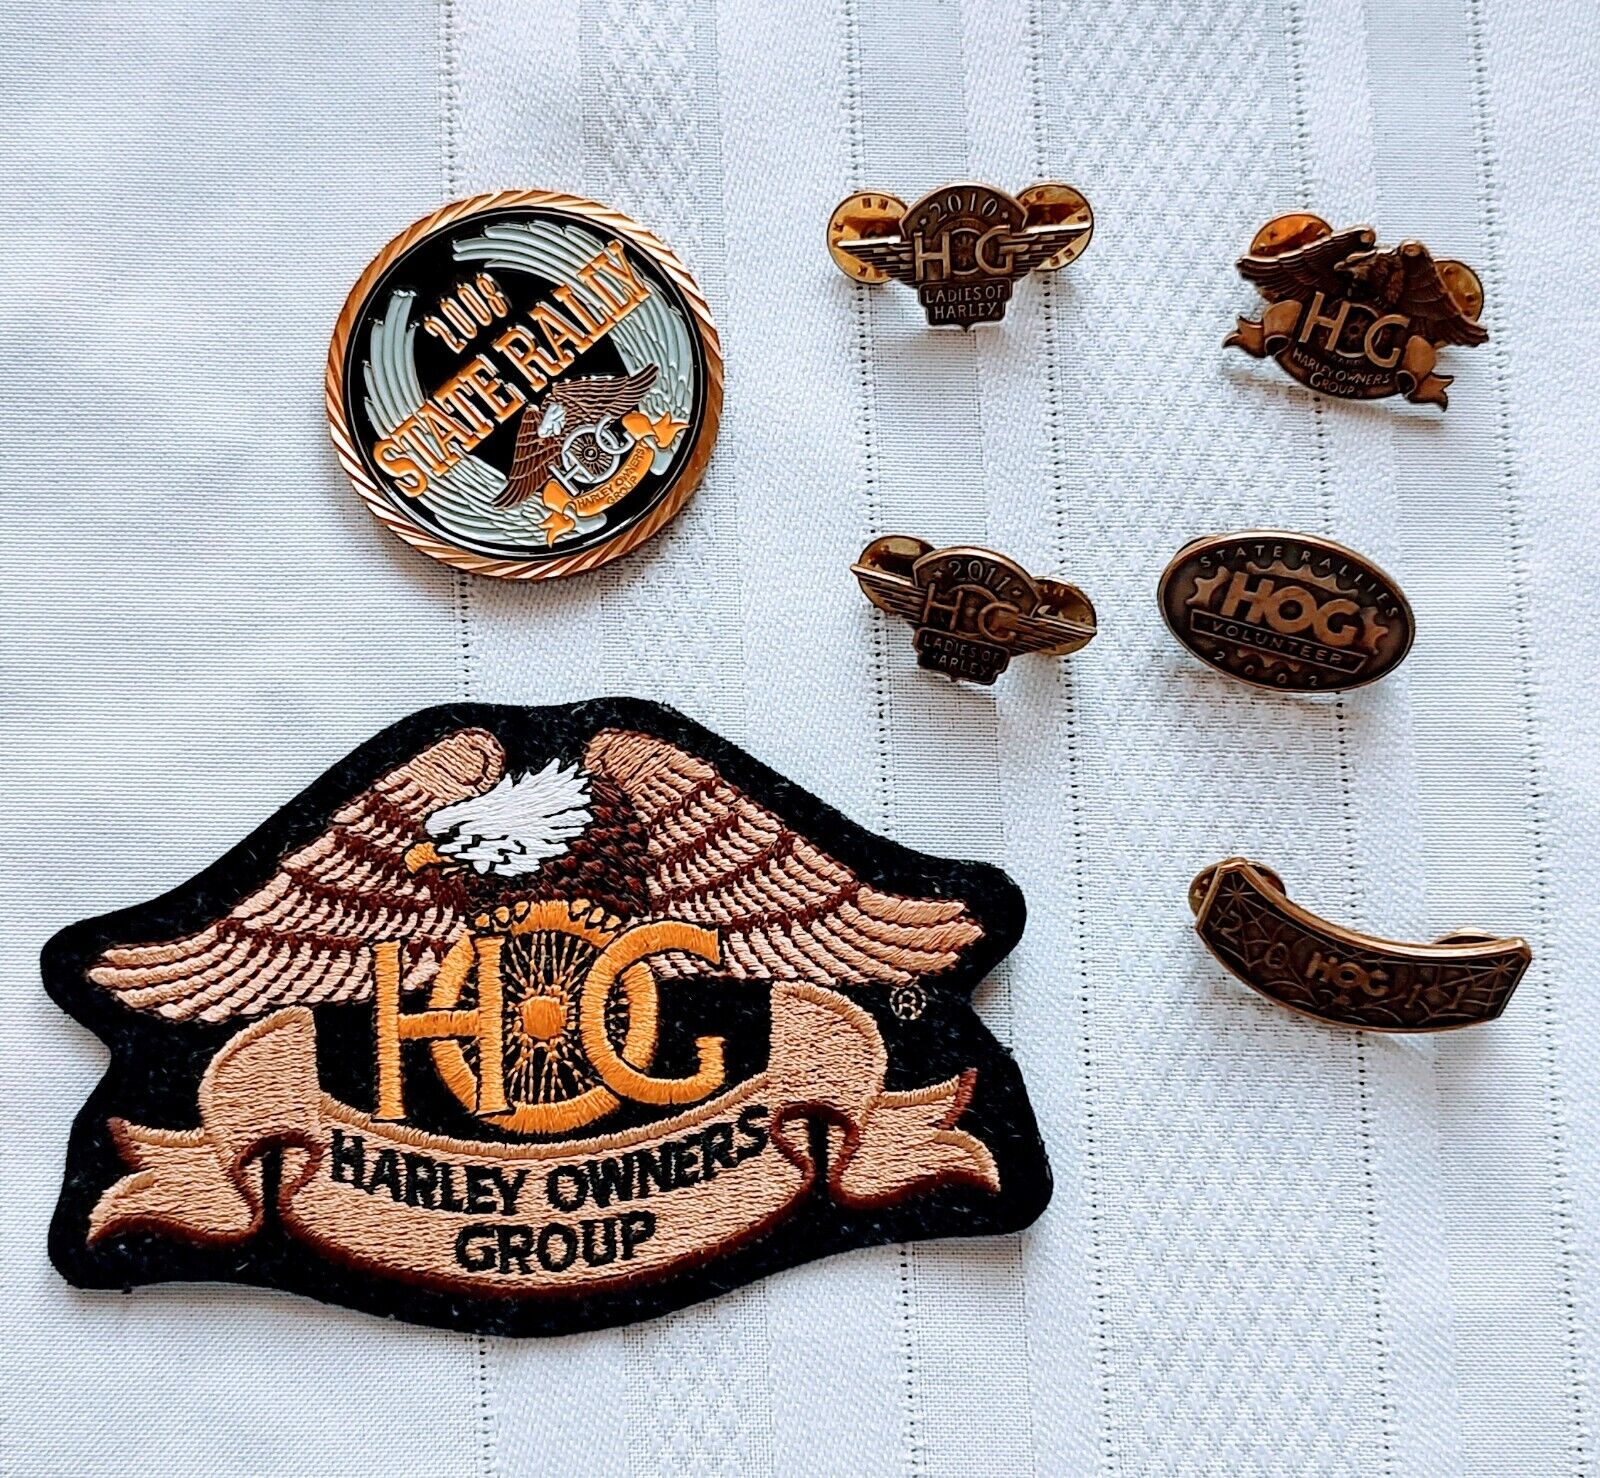 Harley Davidson HOG Harley Owners Group Patch, Various Pins And State Rally Coin